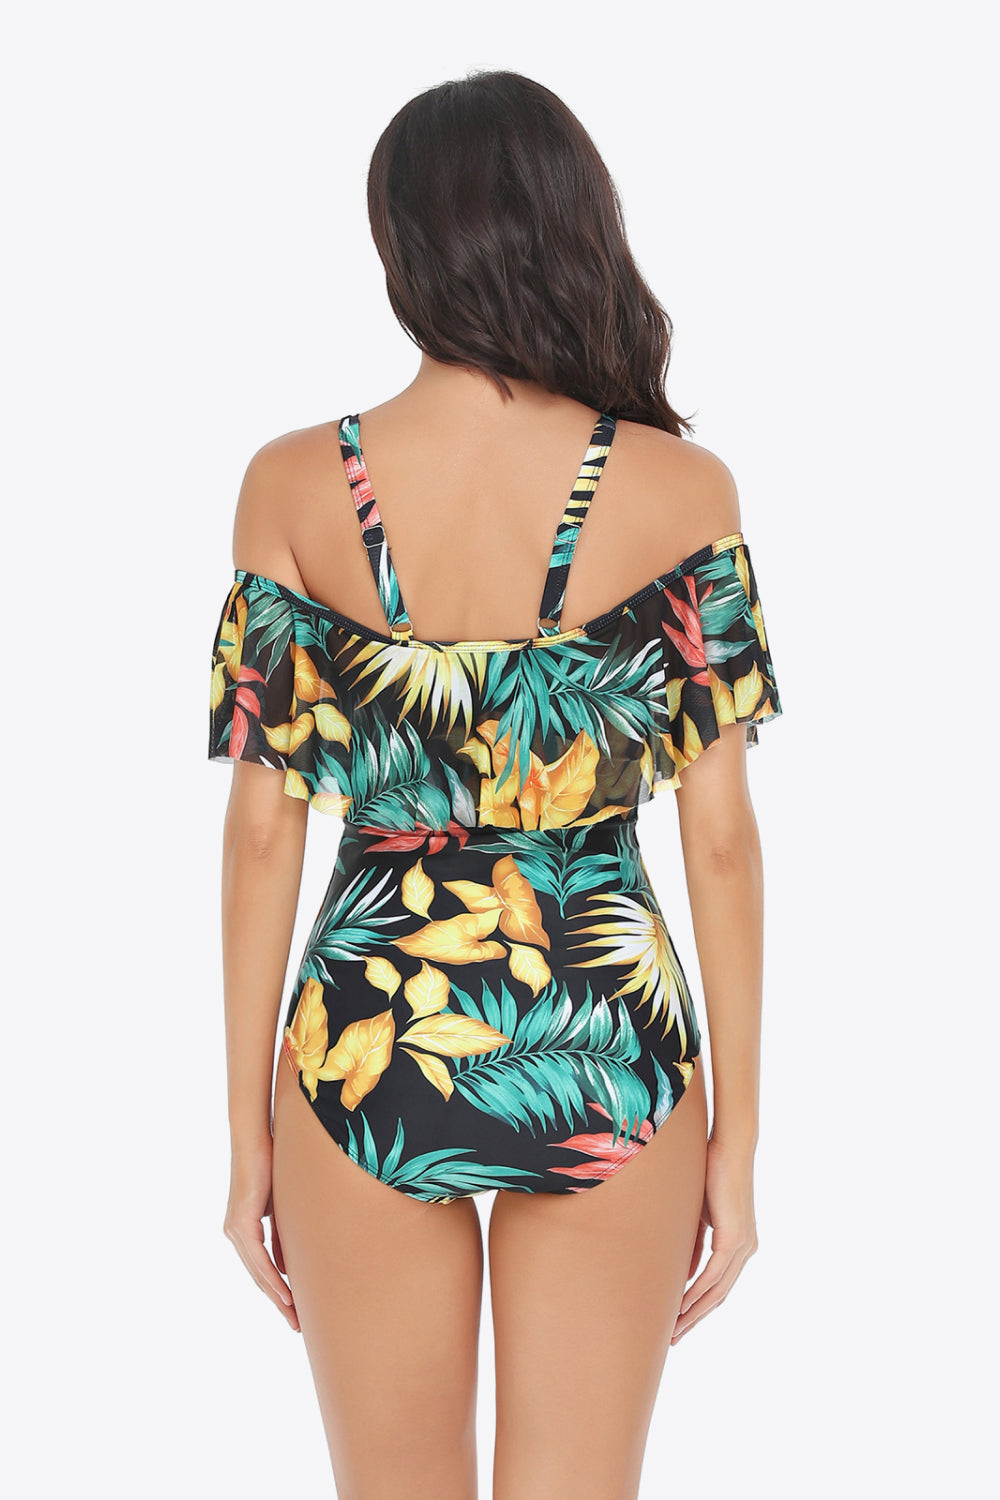 Botanical Print Cold-Shoulder Layered One-Piece Swimsuit - Women’s Clothing & Accessories - Swimwear - 9 - 2024